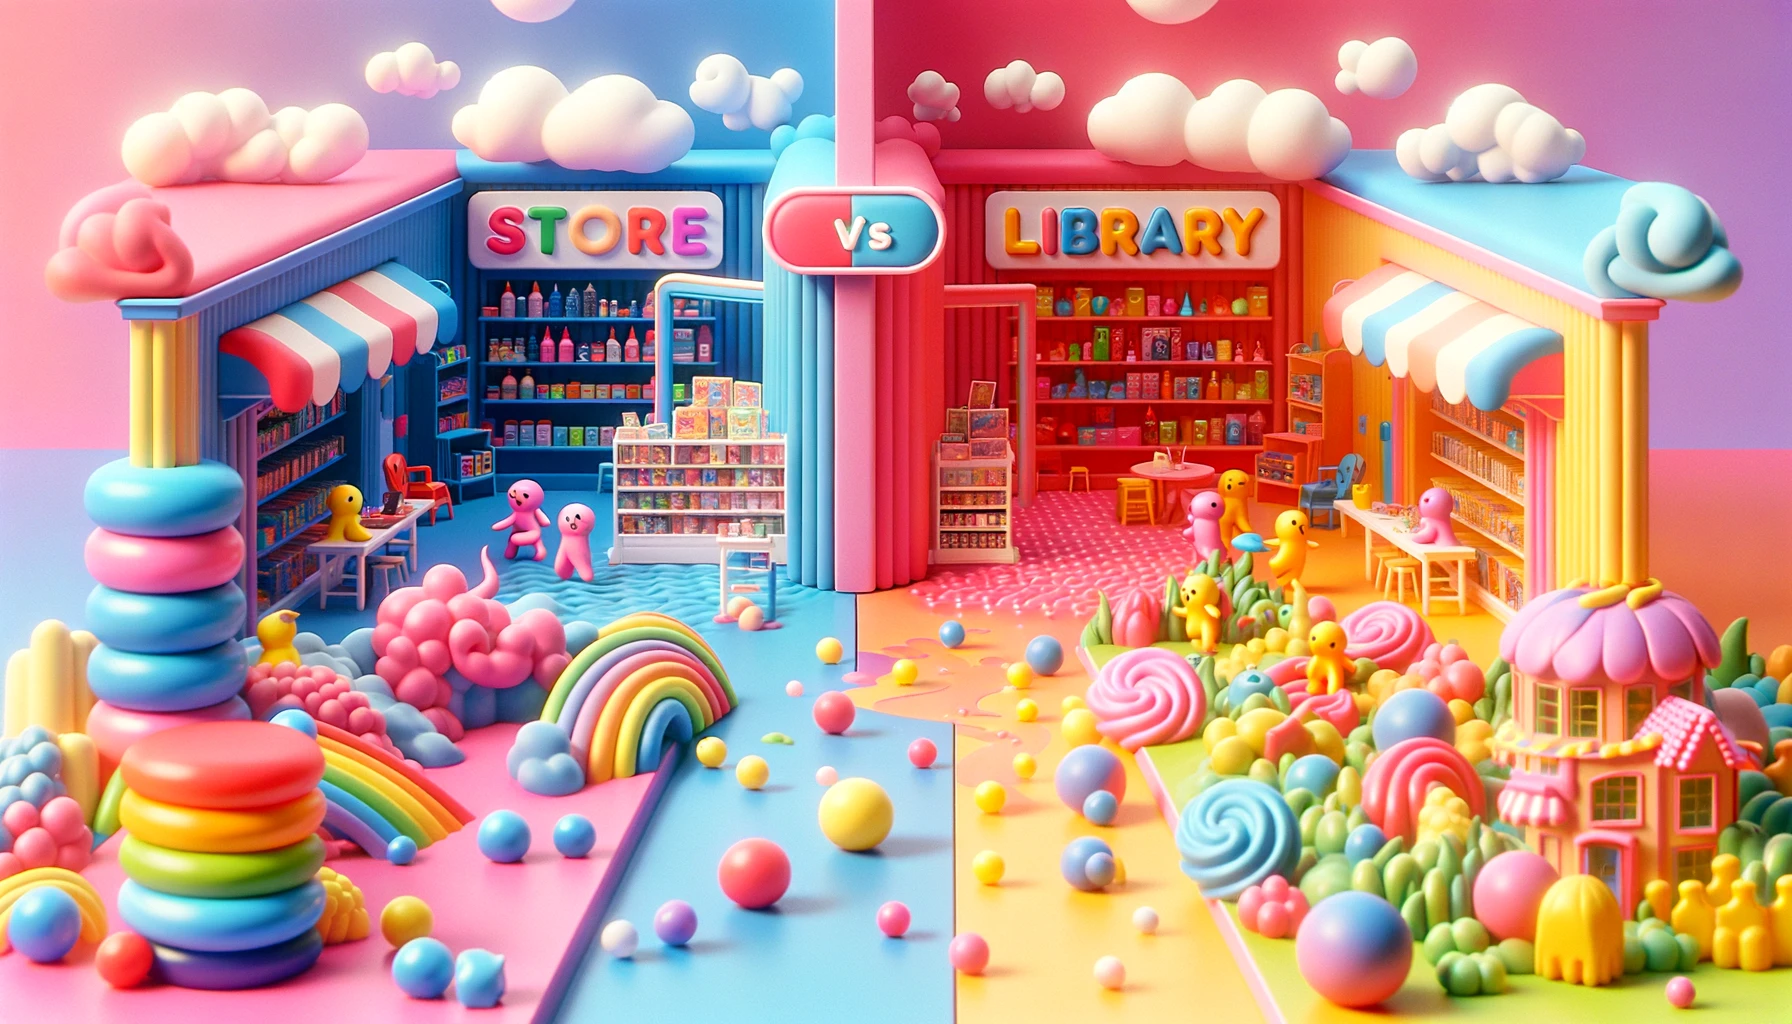 A dreamy depiction of a store on one side and a library on the other